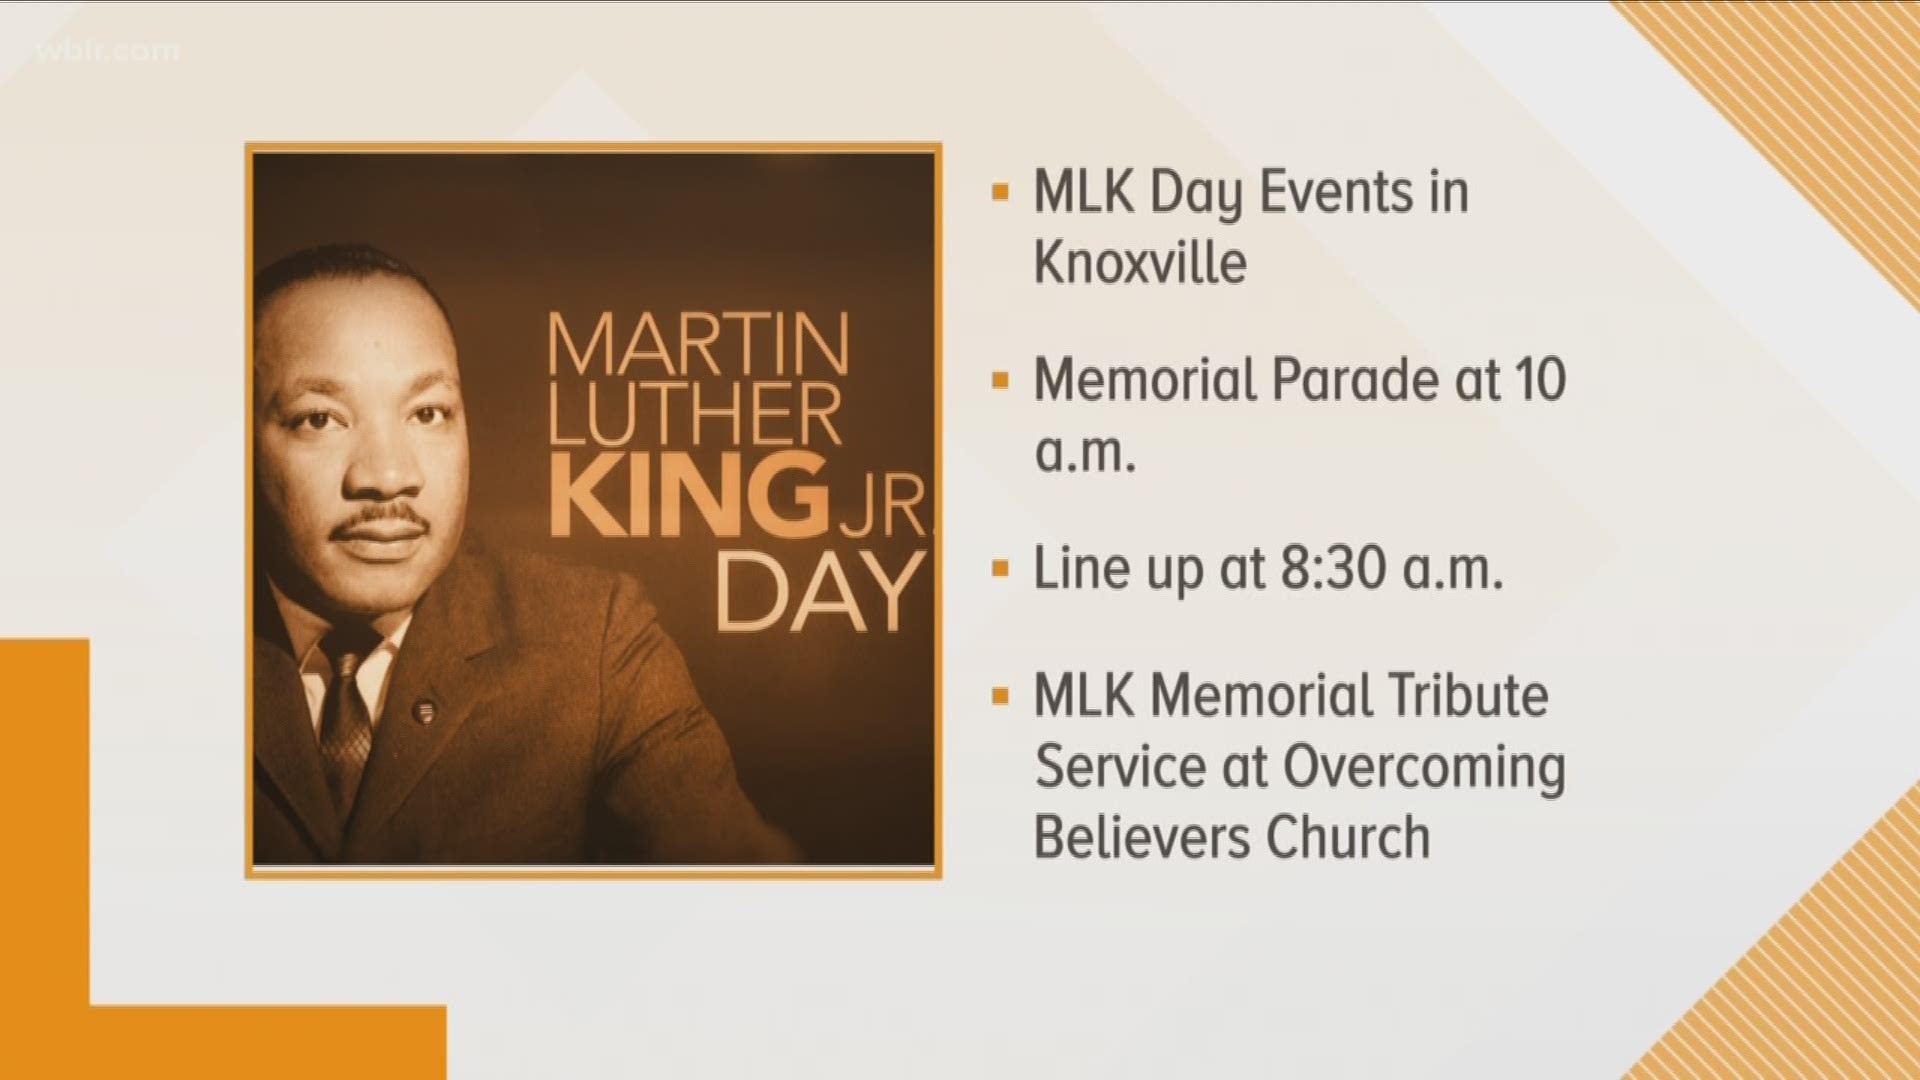 Today, we honor the life and legacy of Reverend Dr. Martin Luther King Jr.